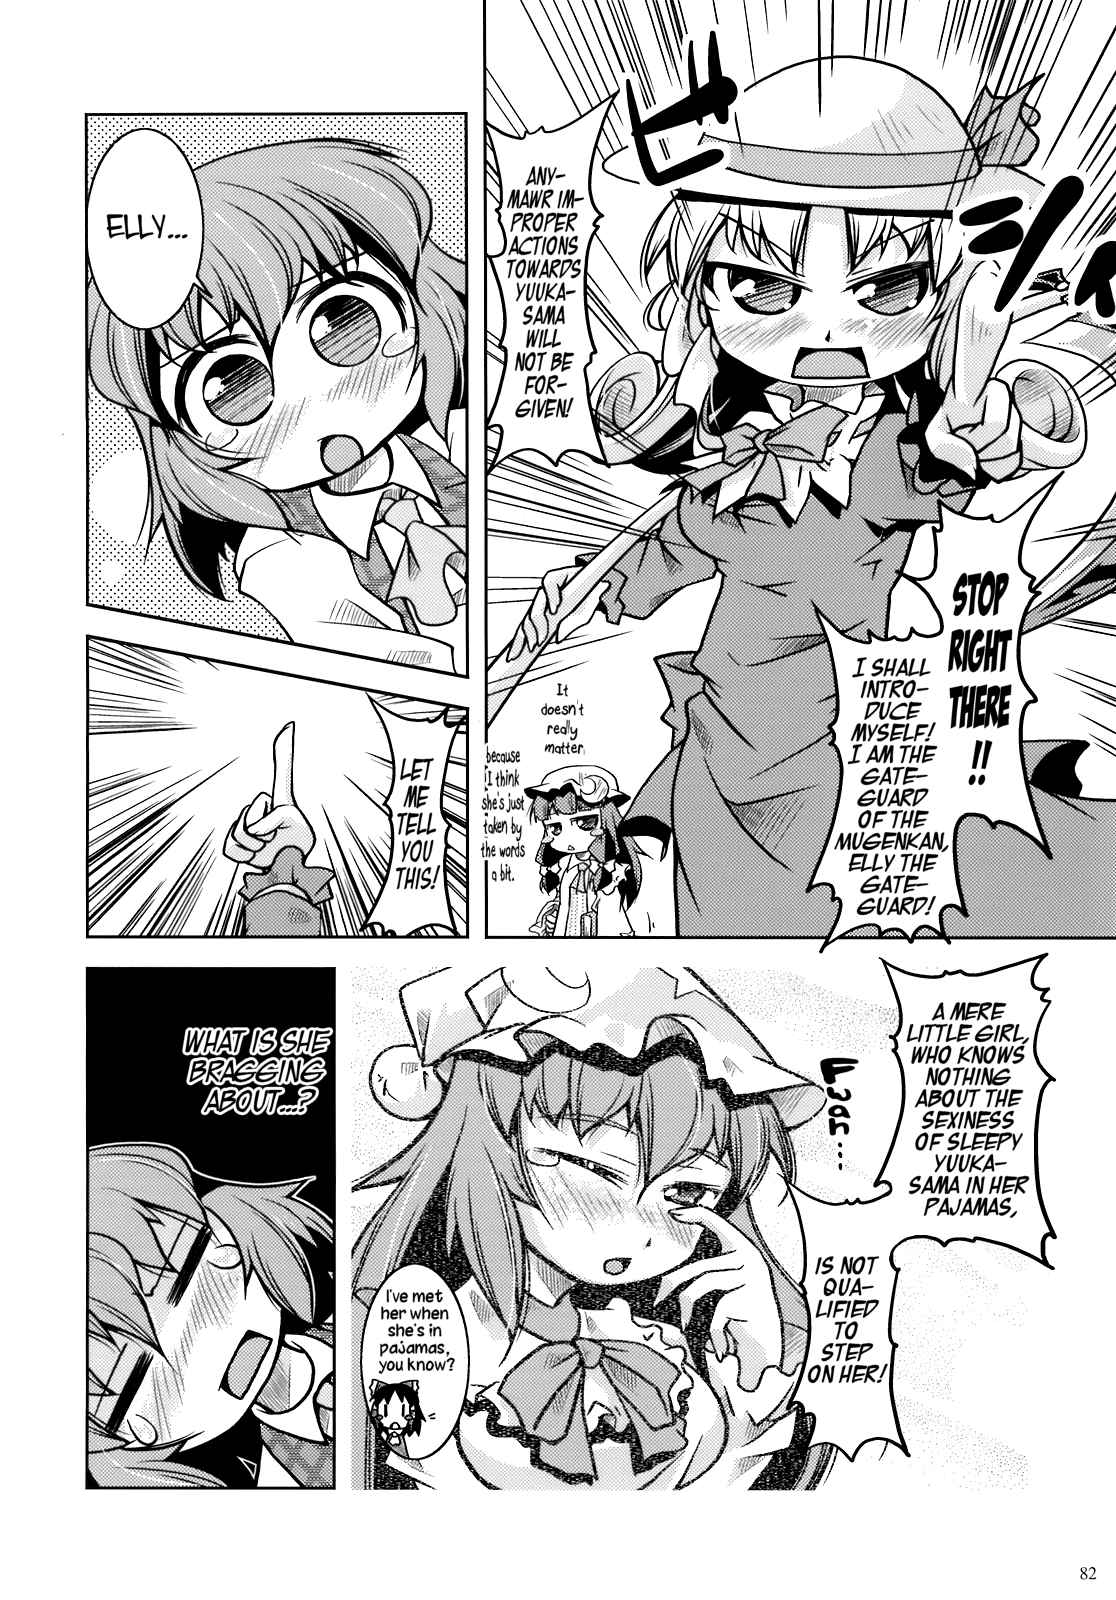 Touhou Yuuka Kazami’s Sunflower Field (Doujinshi) Vol. 1 Ch. 10 Drink till Drunk in the Scent of the Party by Nyagakiya